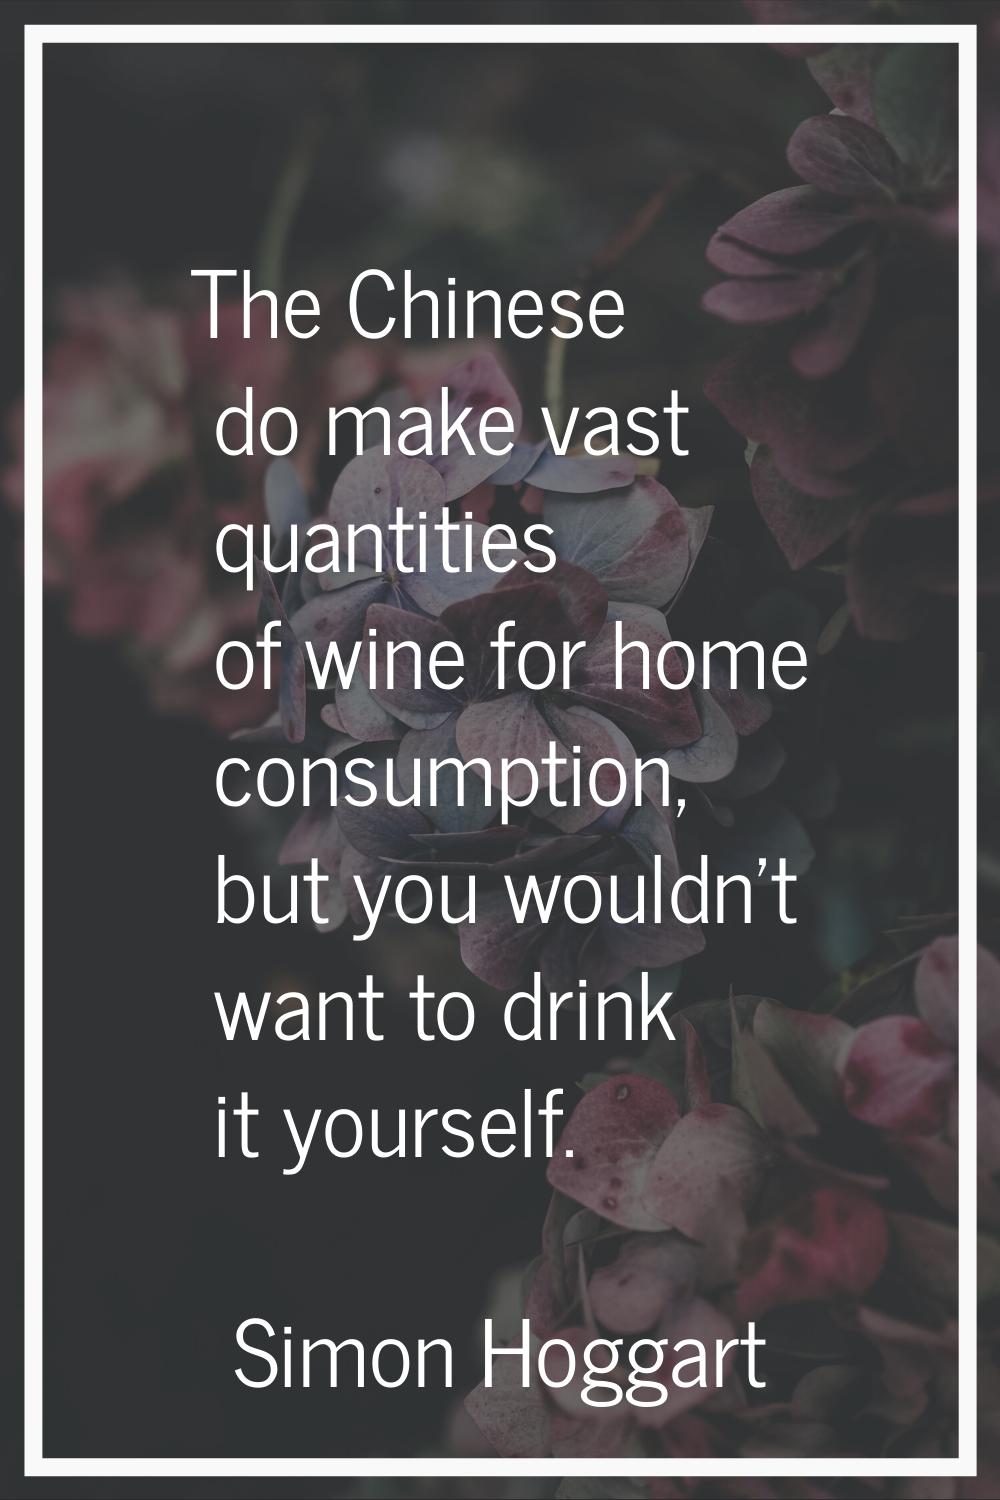 The Chinese do make vast quantities of wine for home consumption, but you wouldn't want to drink it